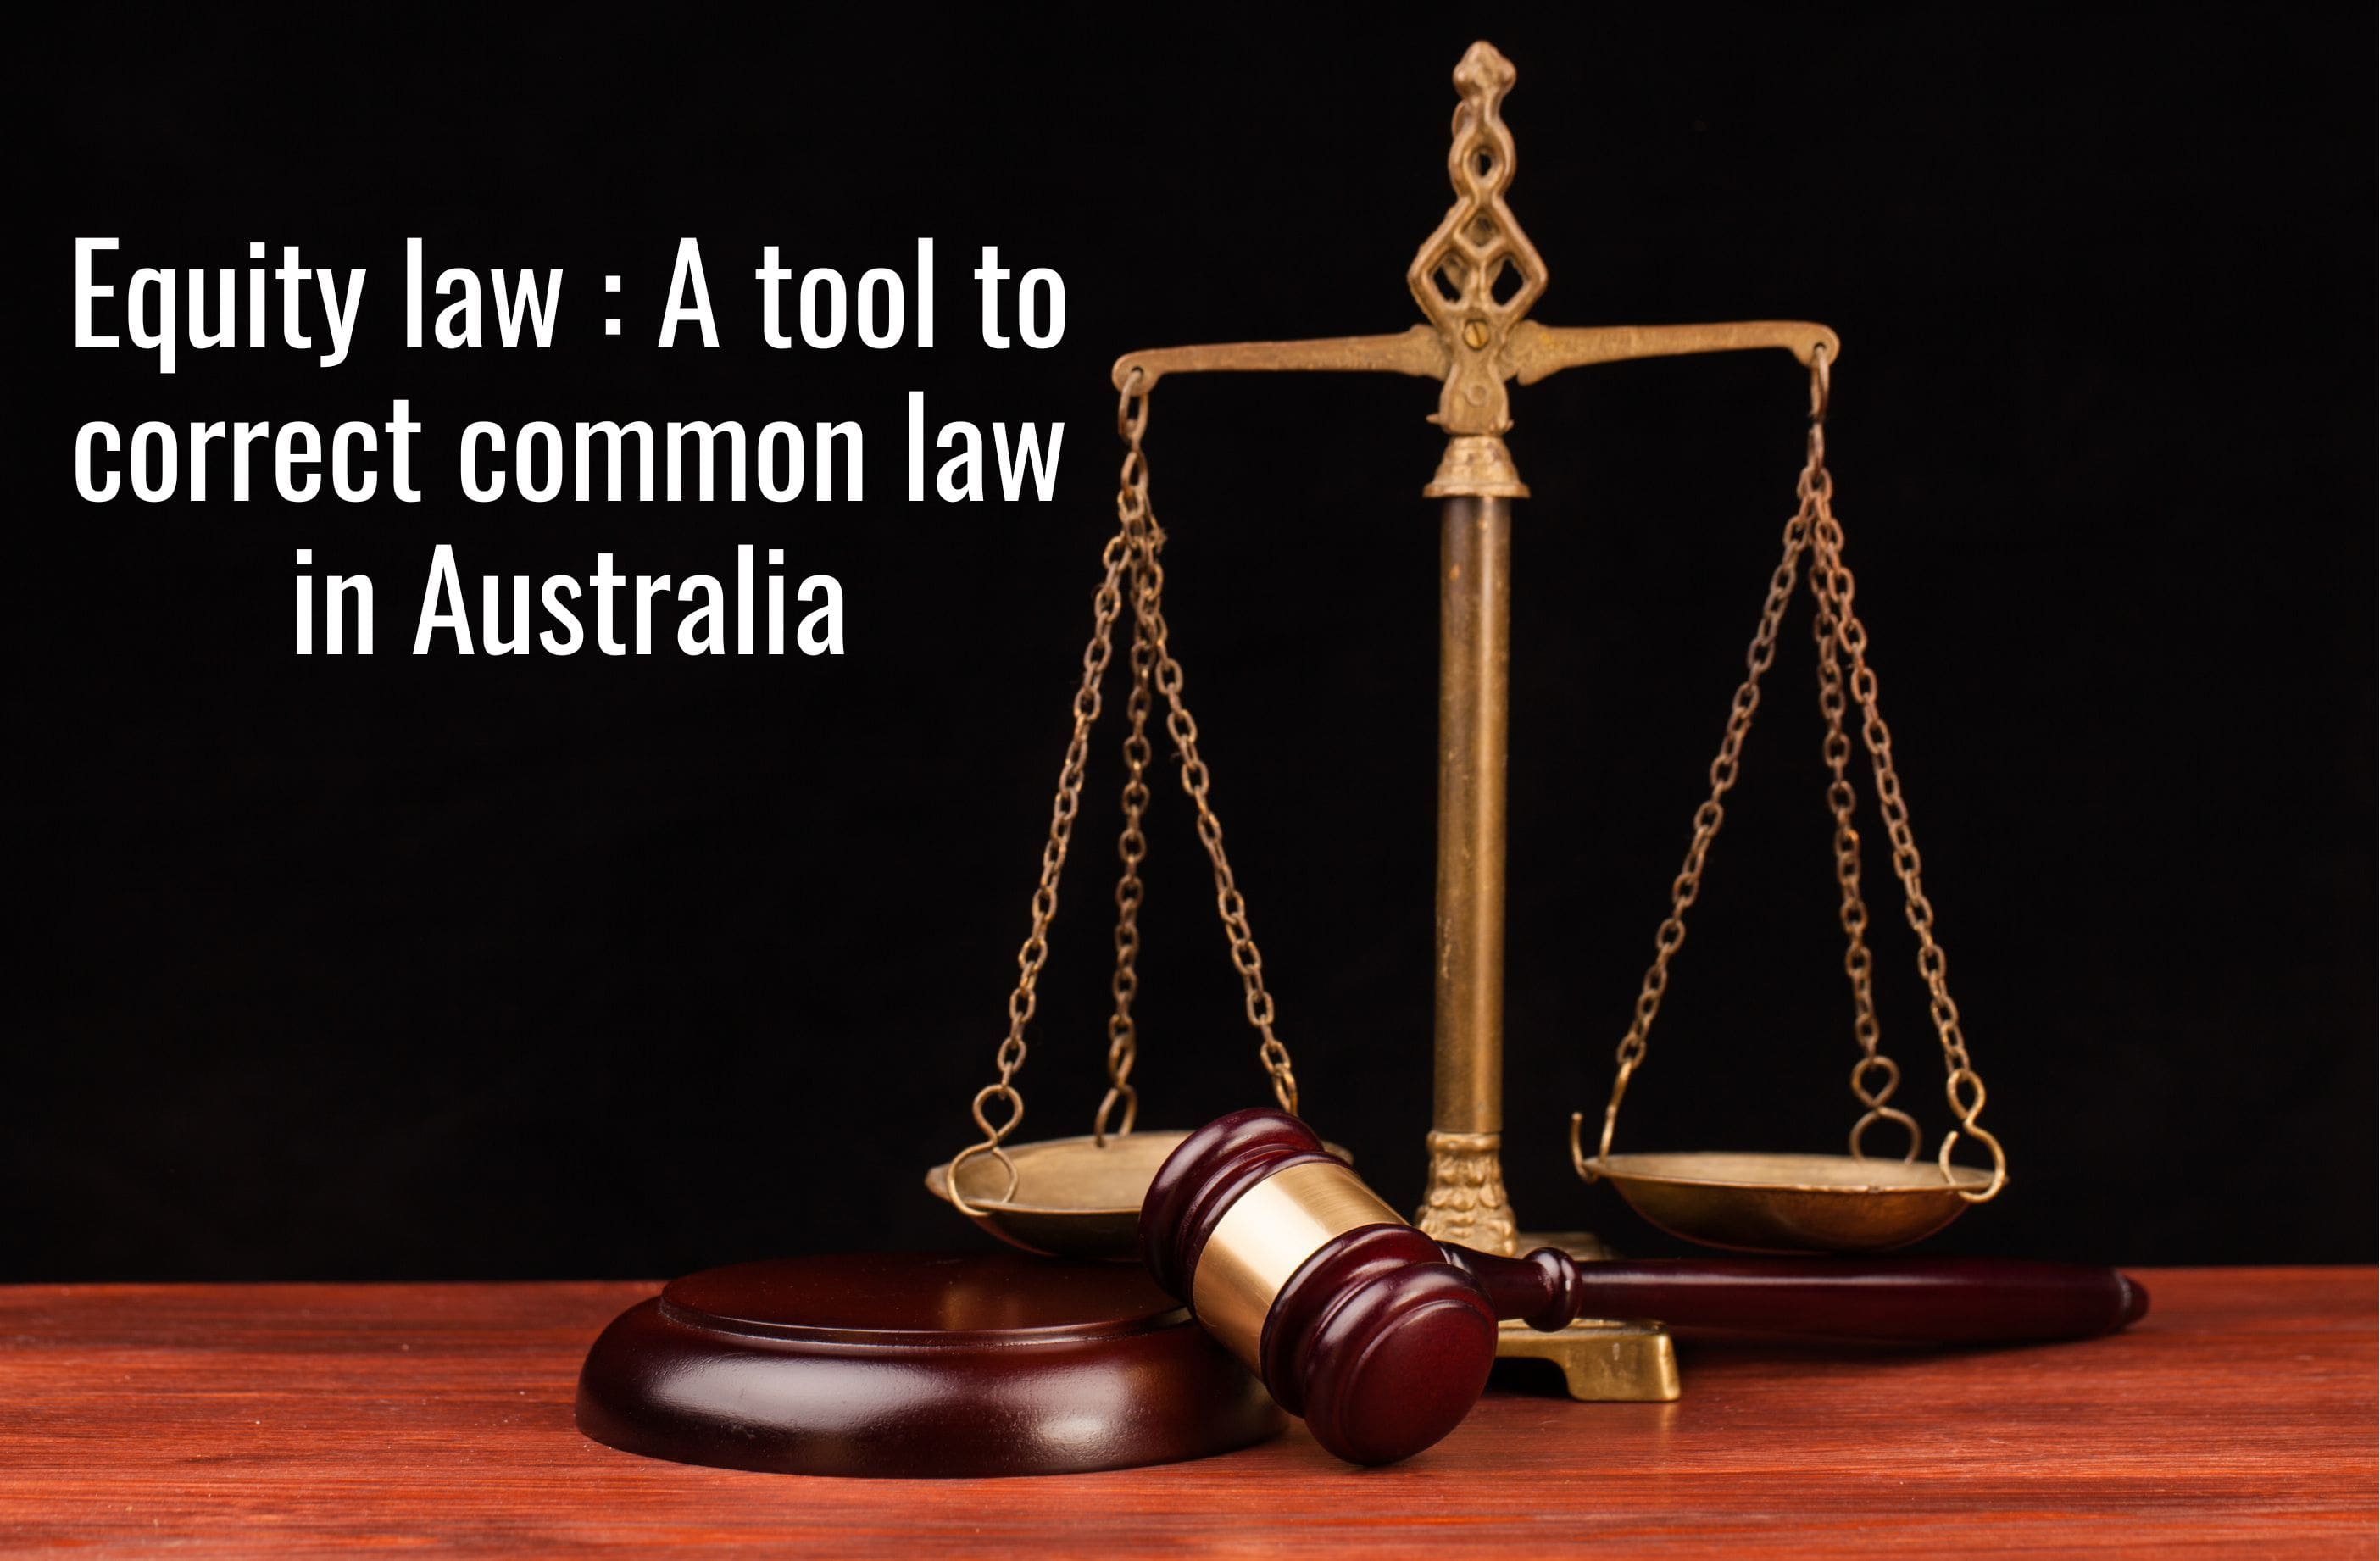 Equity law: A tool to correct common law in Australia